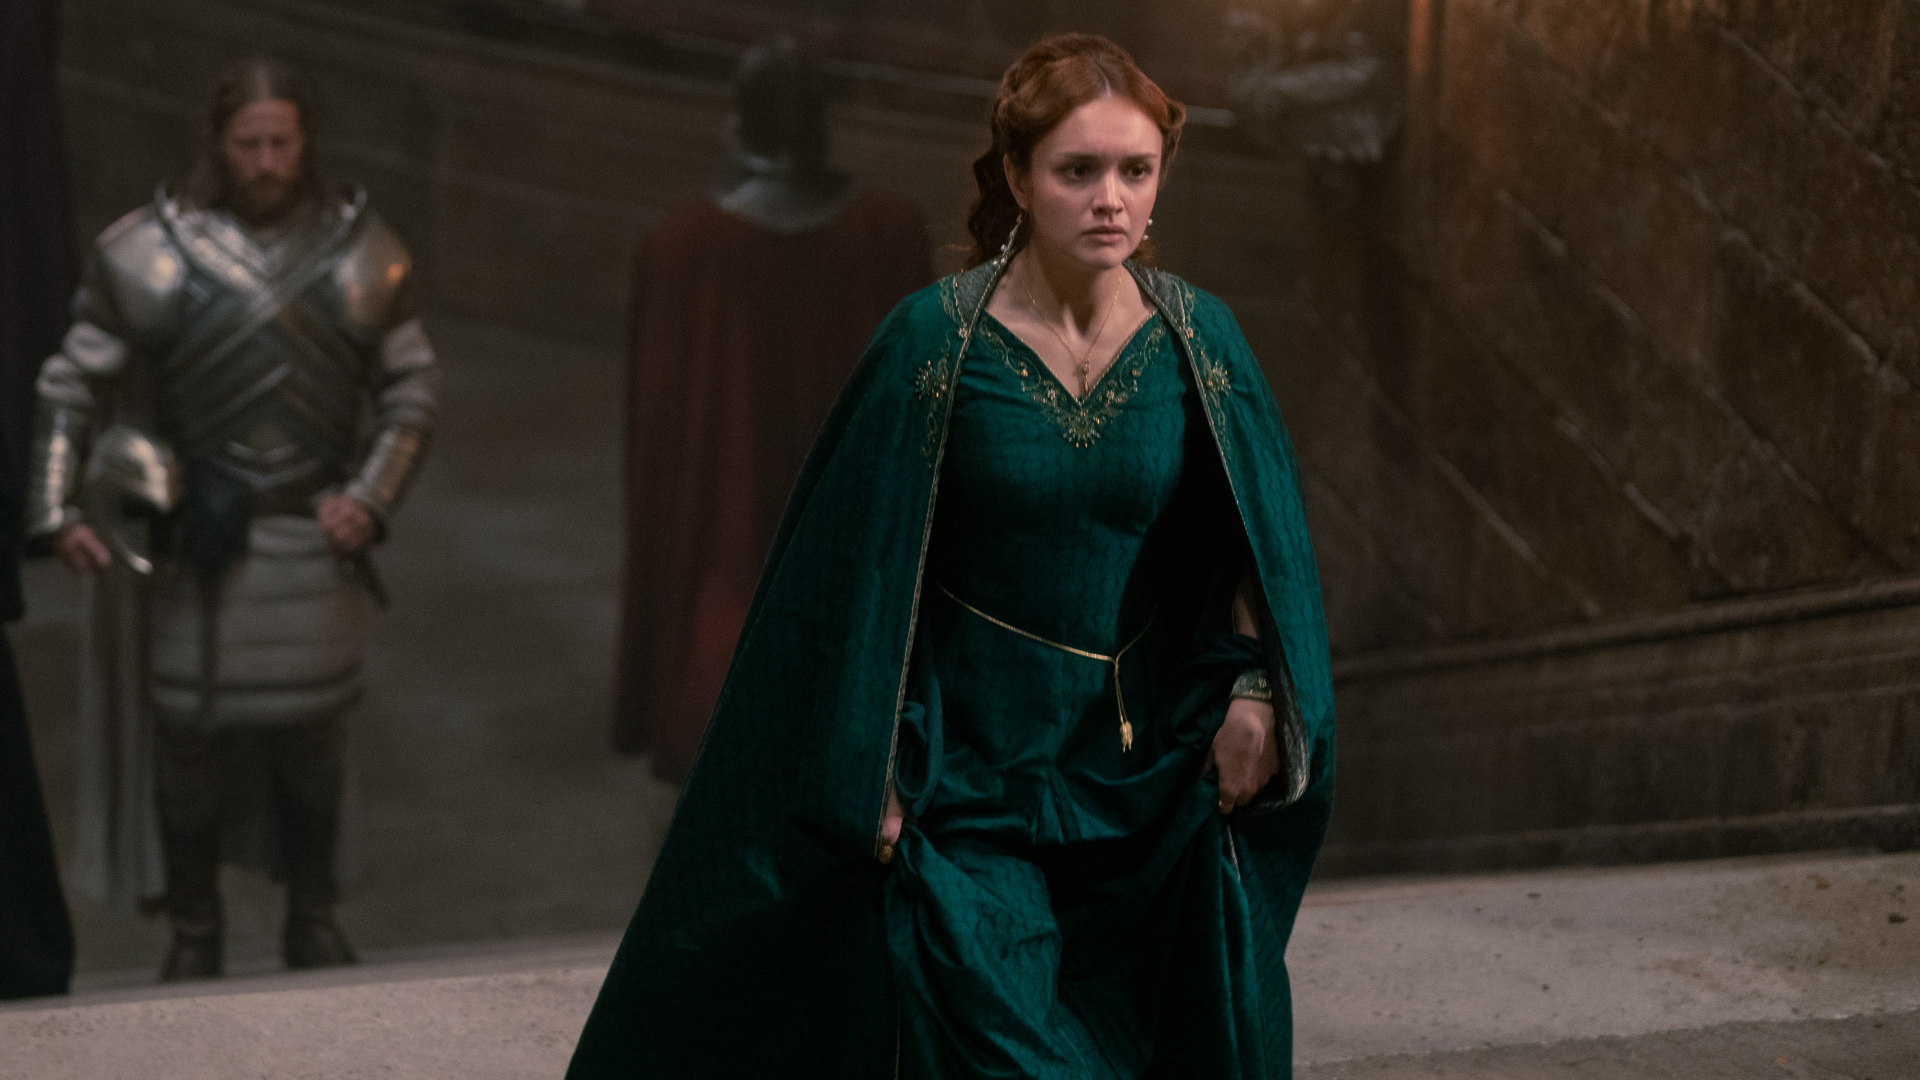 Alicent Hightower (Olivia Cooke) at court in a long green gown in House of the Dragon.